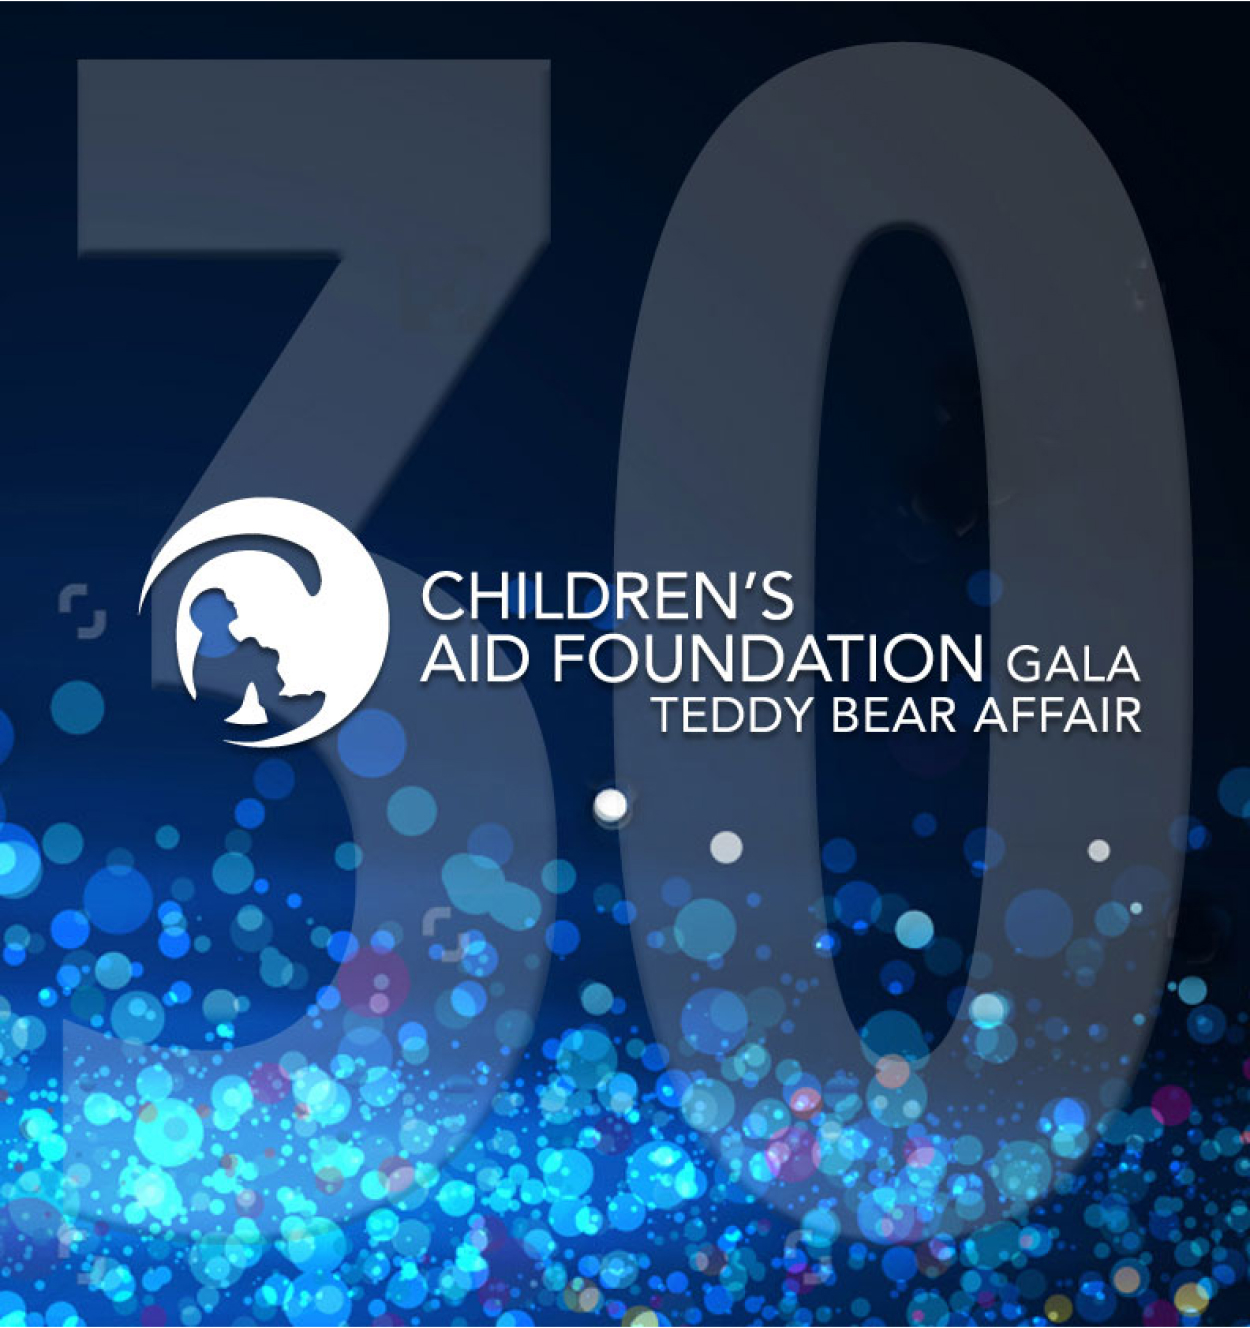 Children’s Aid Foundation 30th Annual Gala – Teddy Bear Affair banner image with blue sparkles at the base